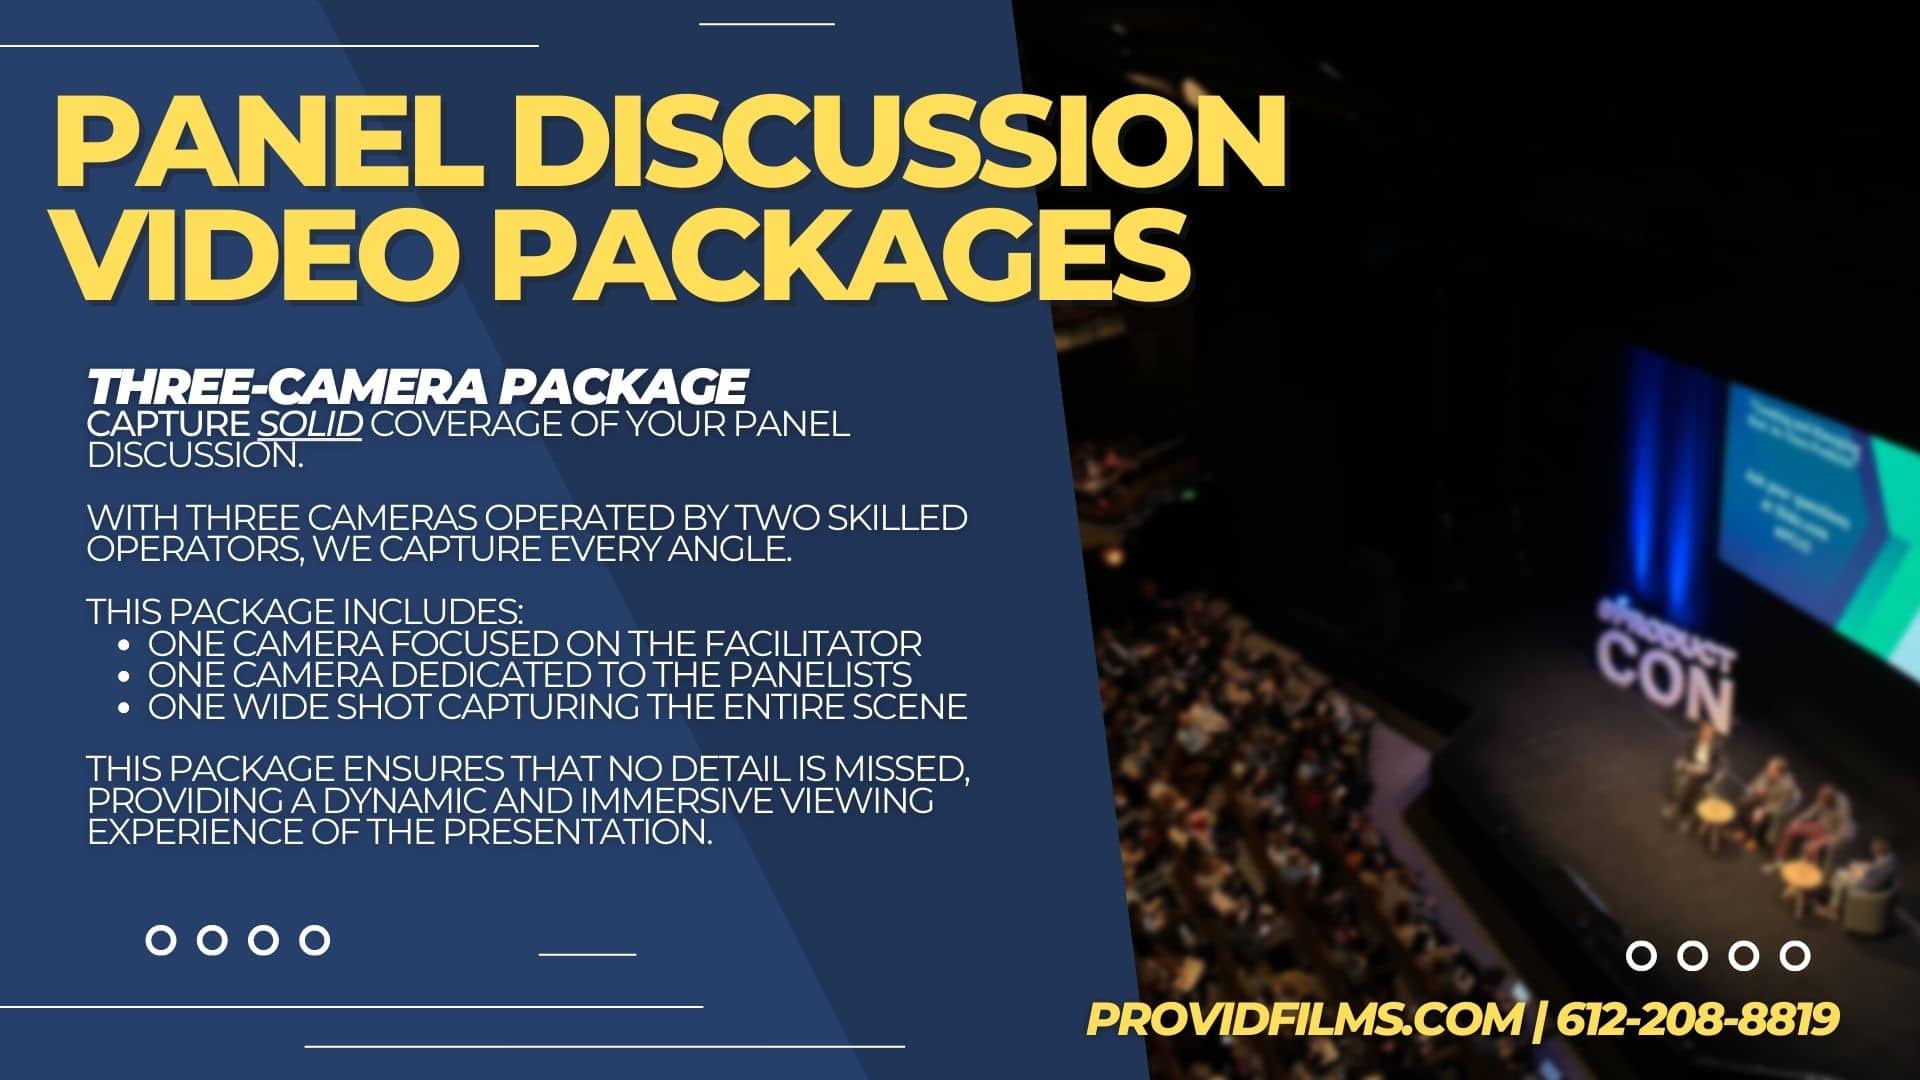 Panel Discussions Video Services Graphic - 3 camera package